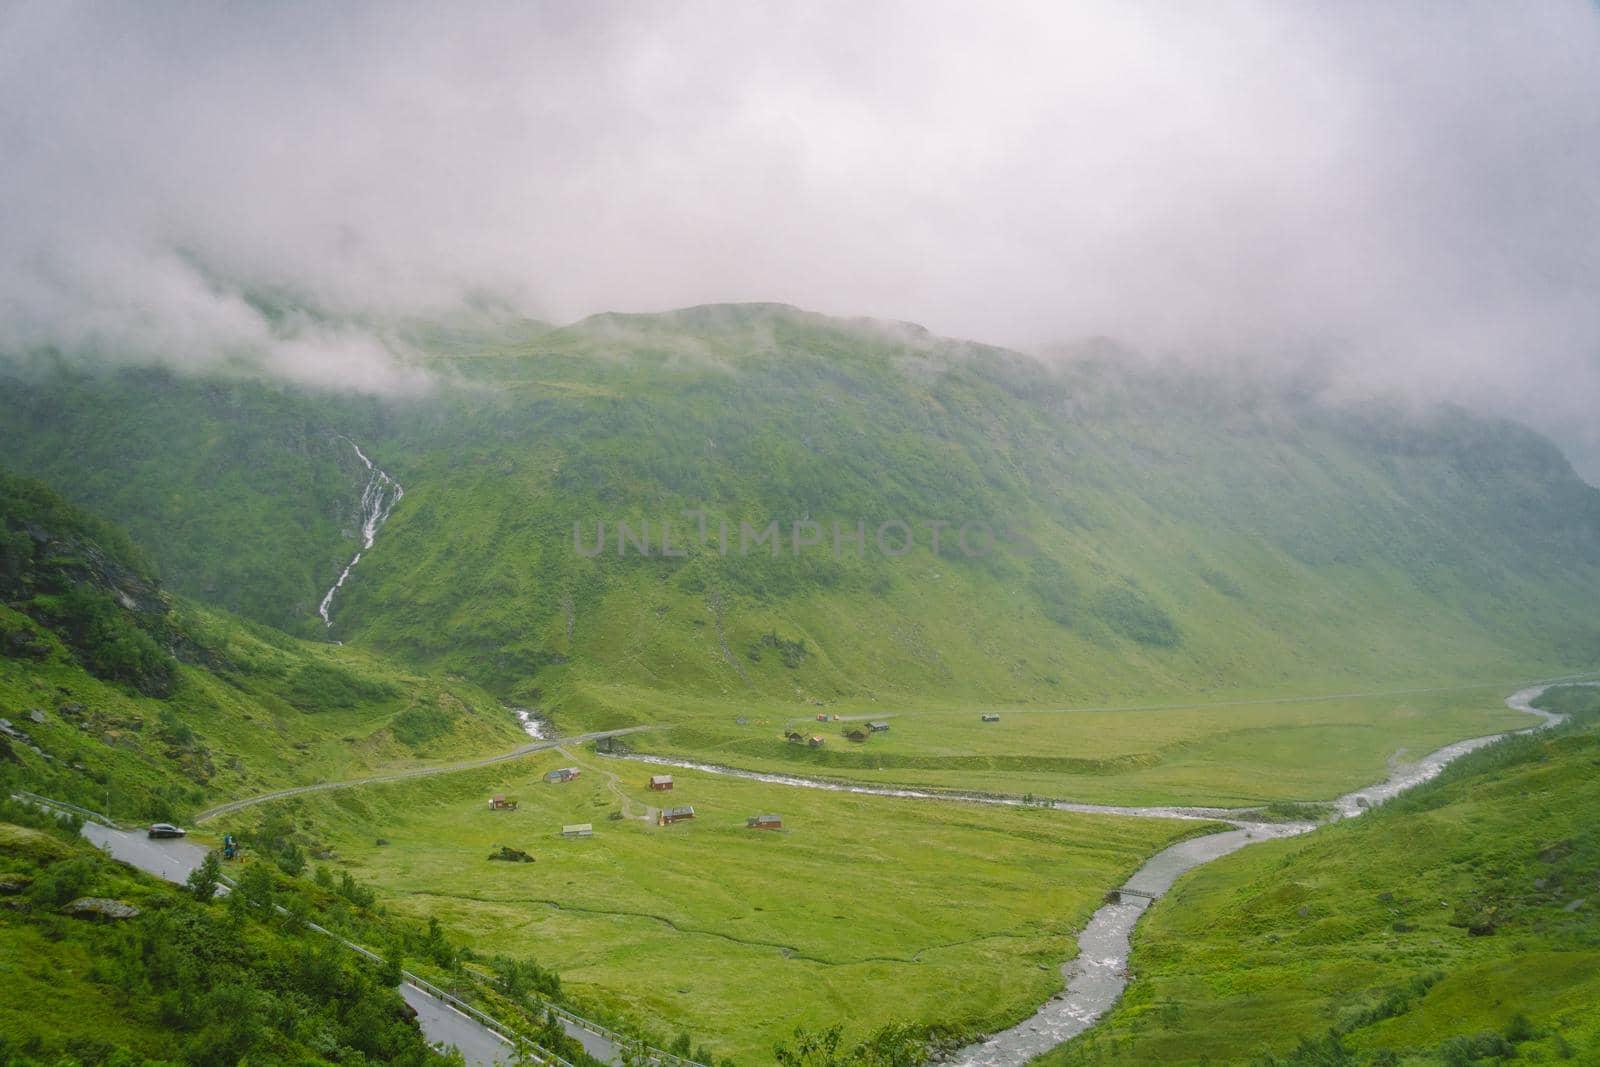 Beautiful landscape and scenery view of Norway, green scenery hills and mountain in a cloudy day. green scenery of hills and mountain partially covered with fog. Farm and cottages on a glacier river.